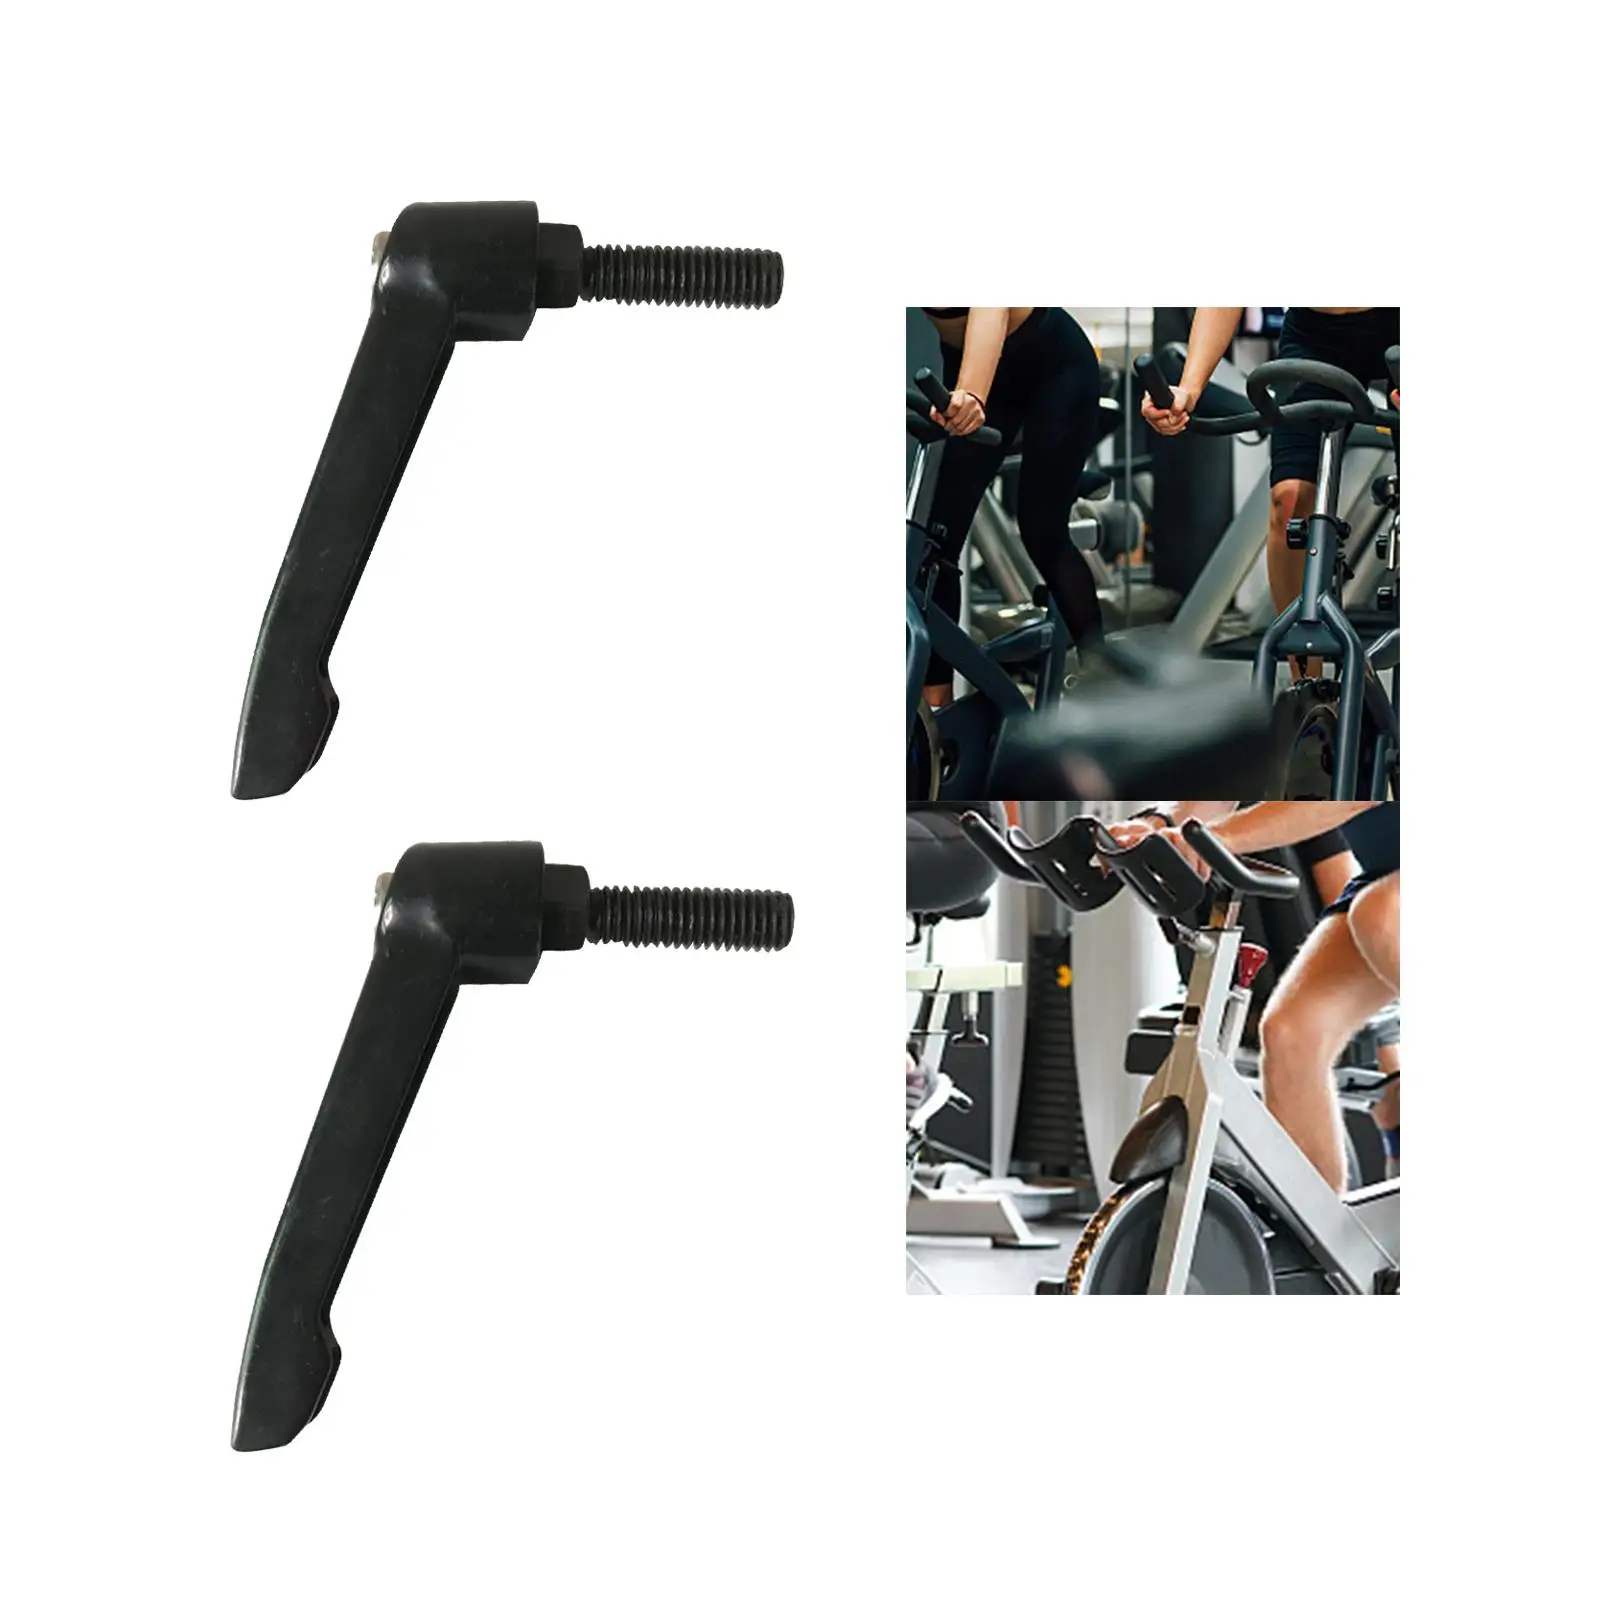 Spring Knob Pin Attachments for Exercise Training Machine, Equipment Parts